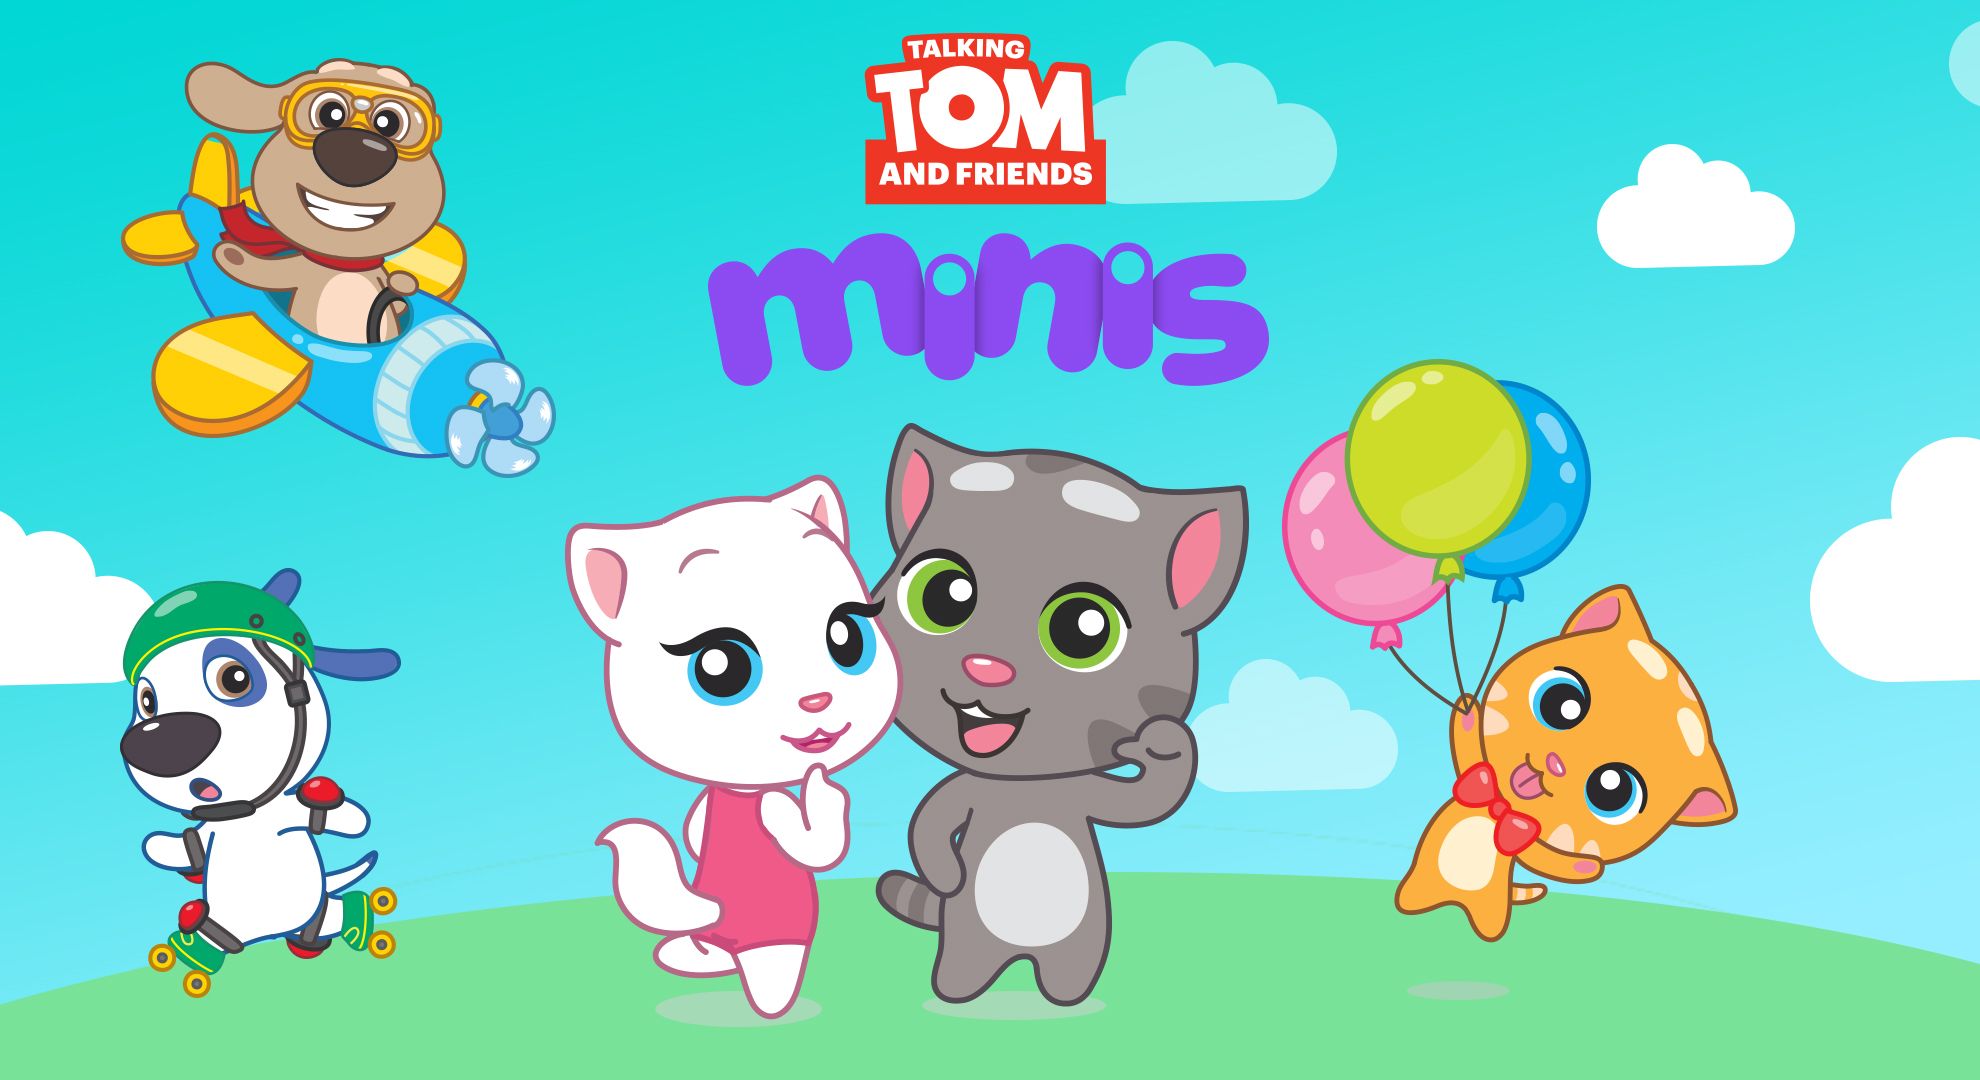 Watch Talking Tom and Friends Minis